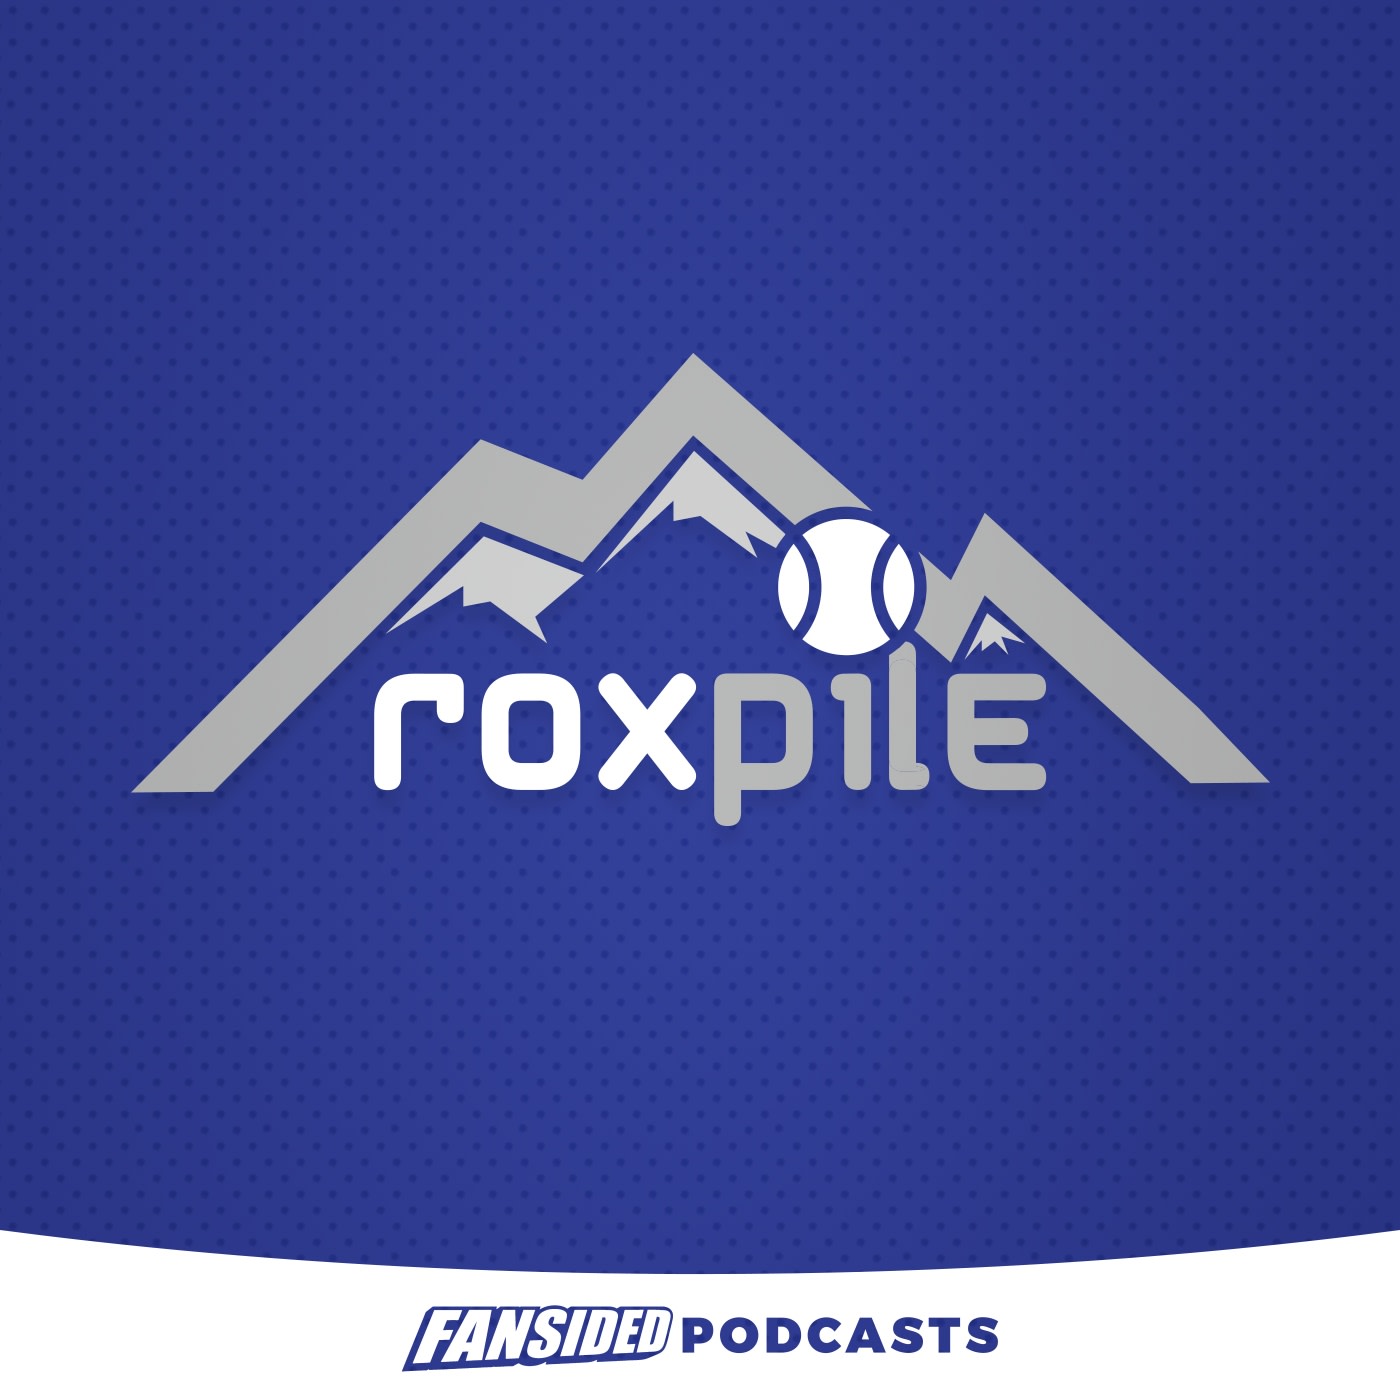 Bryan Kilpatrick of Mile High Sports joins to talk Rockies and taco's